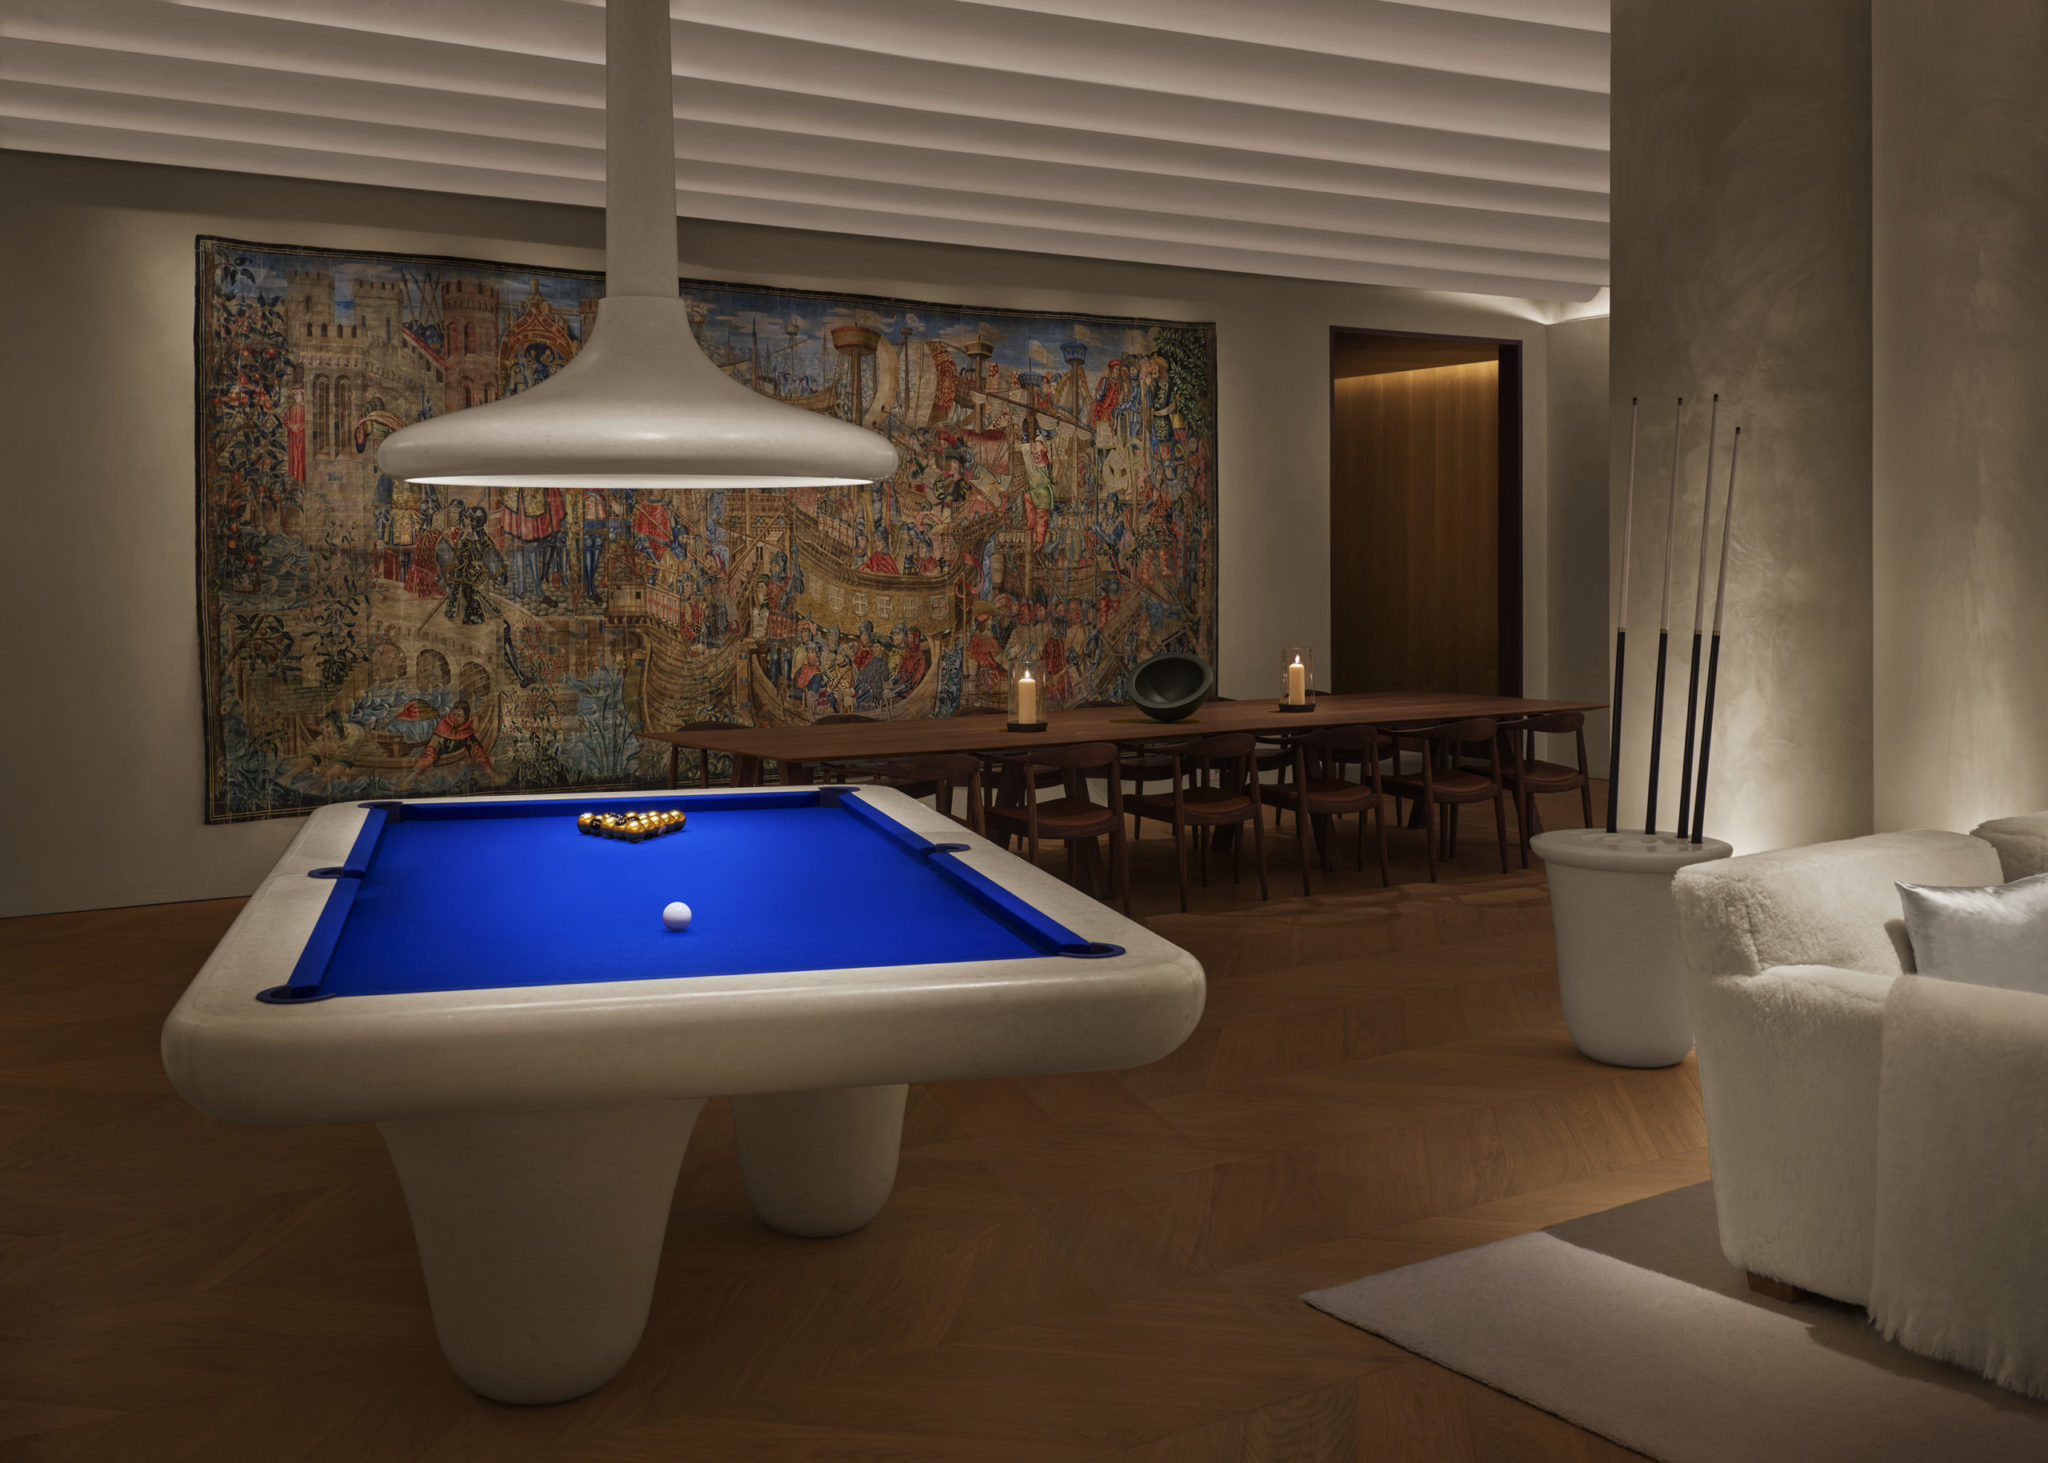 Modern pool table with communal table in background